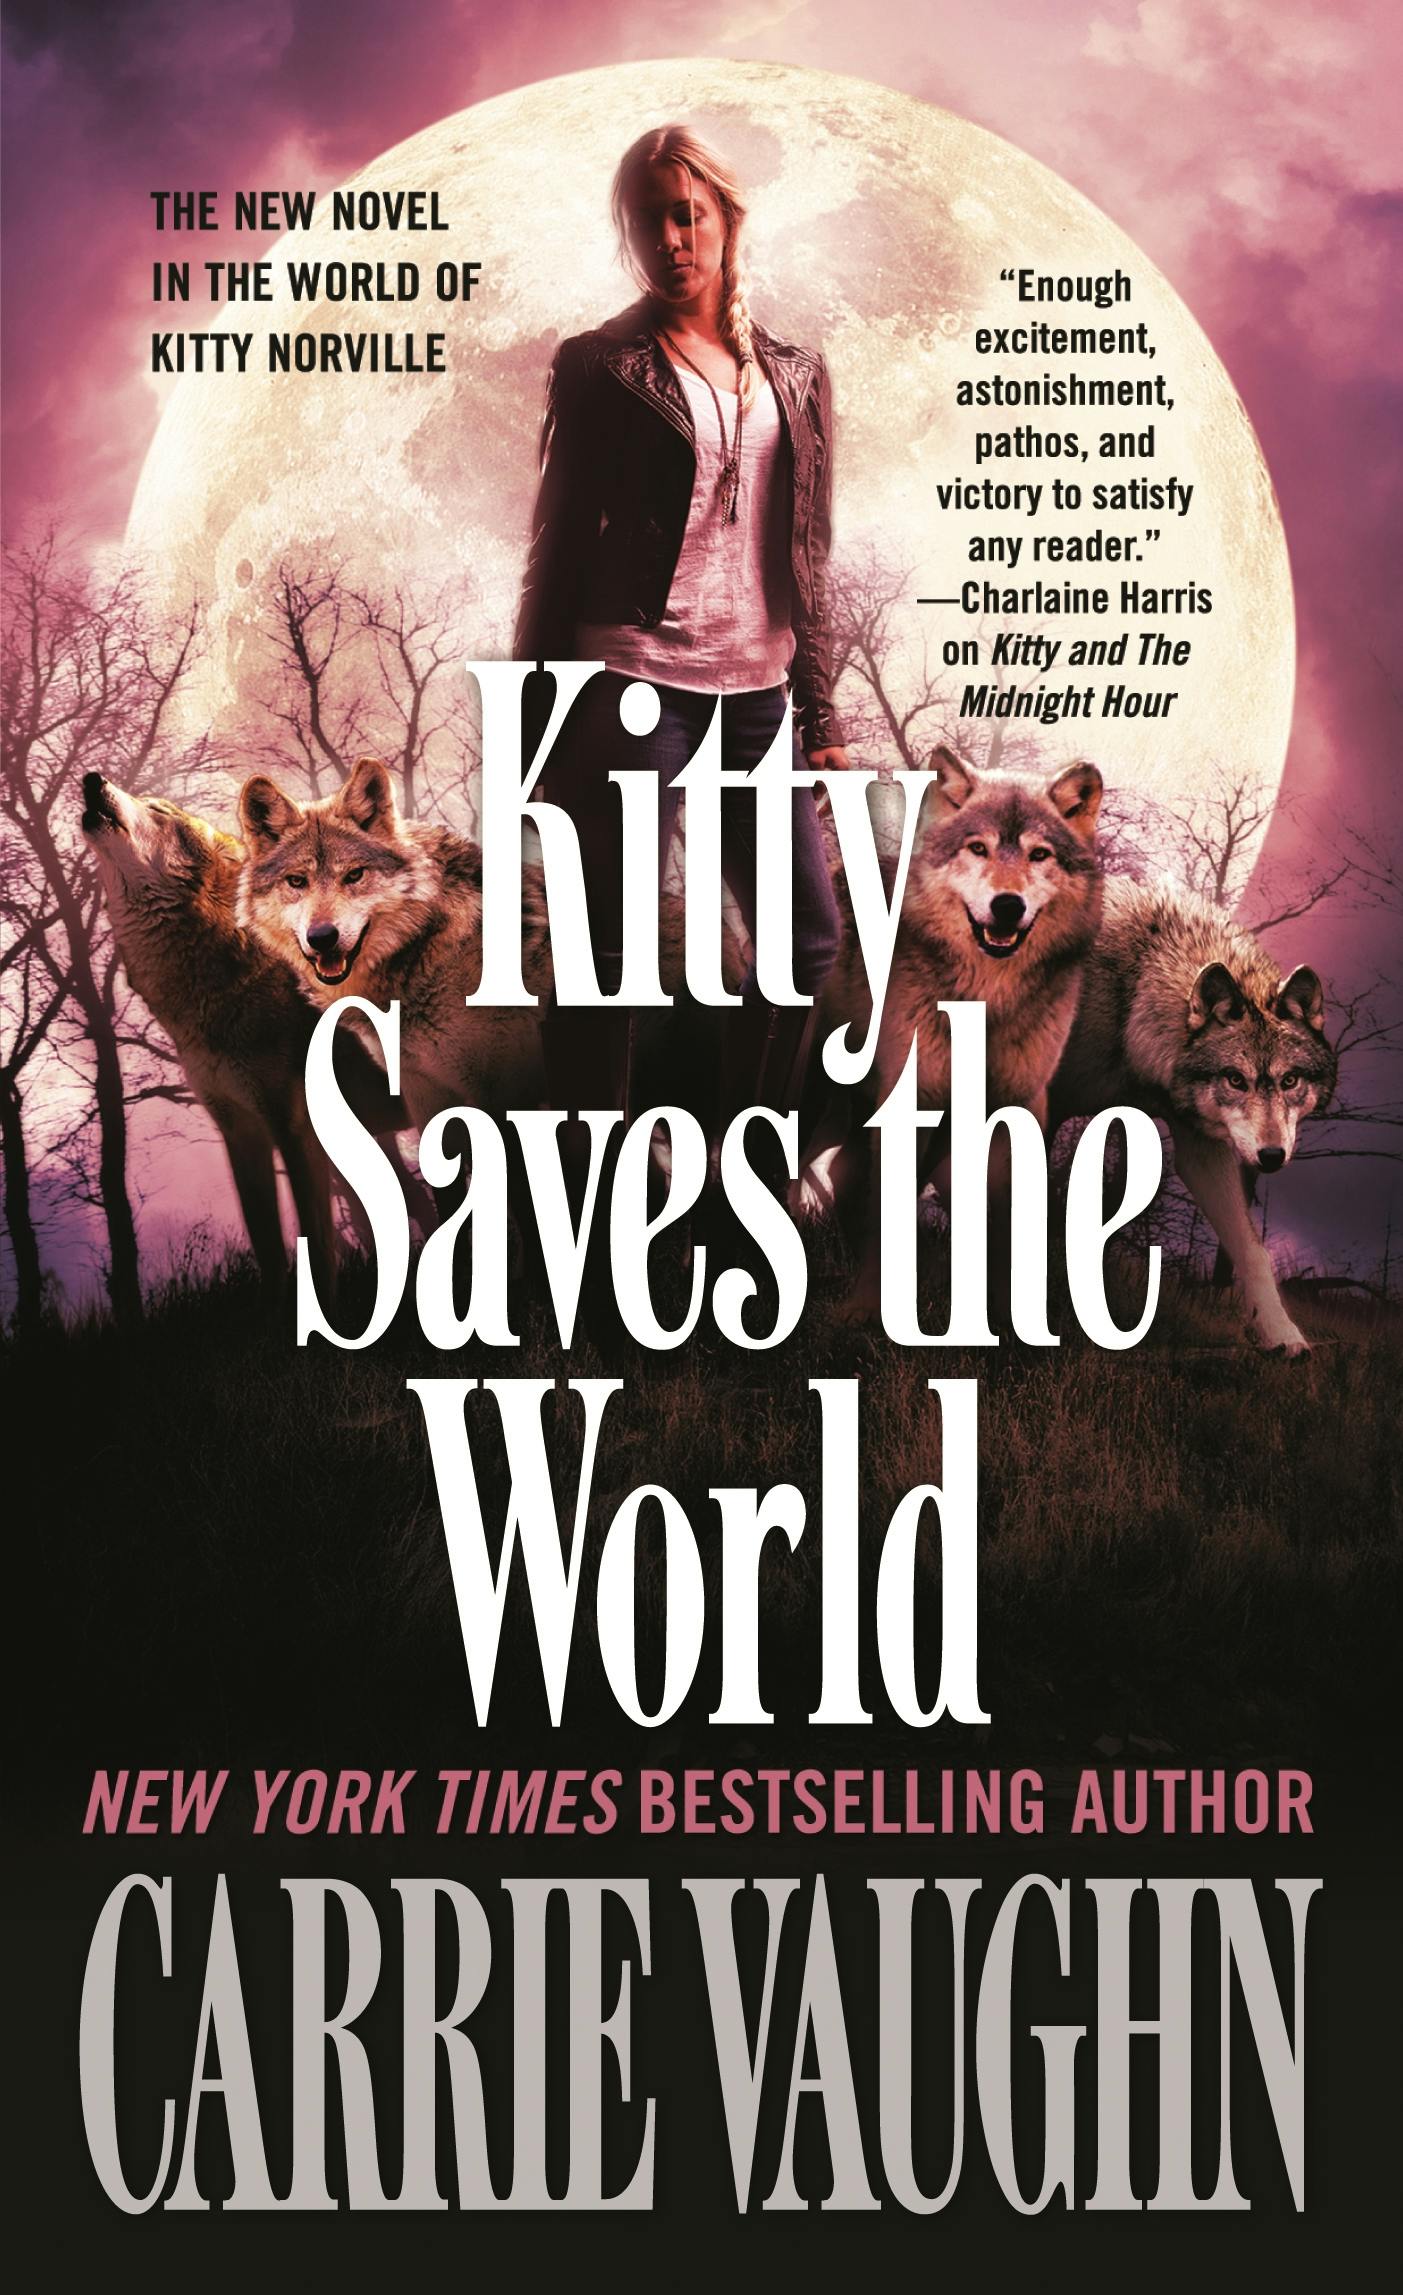 Cover for the book titled as: Kitty Saves the World